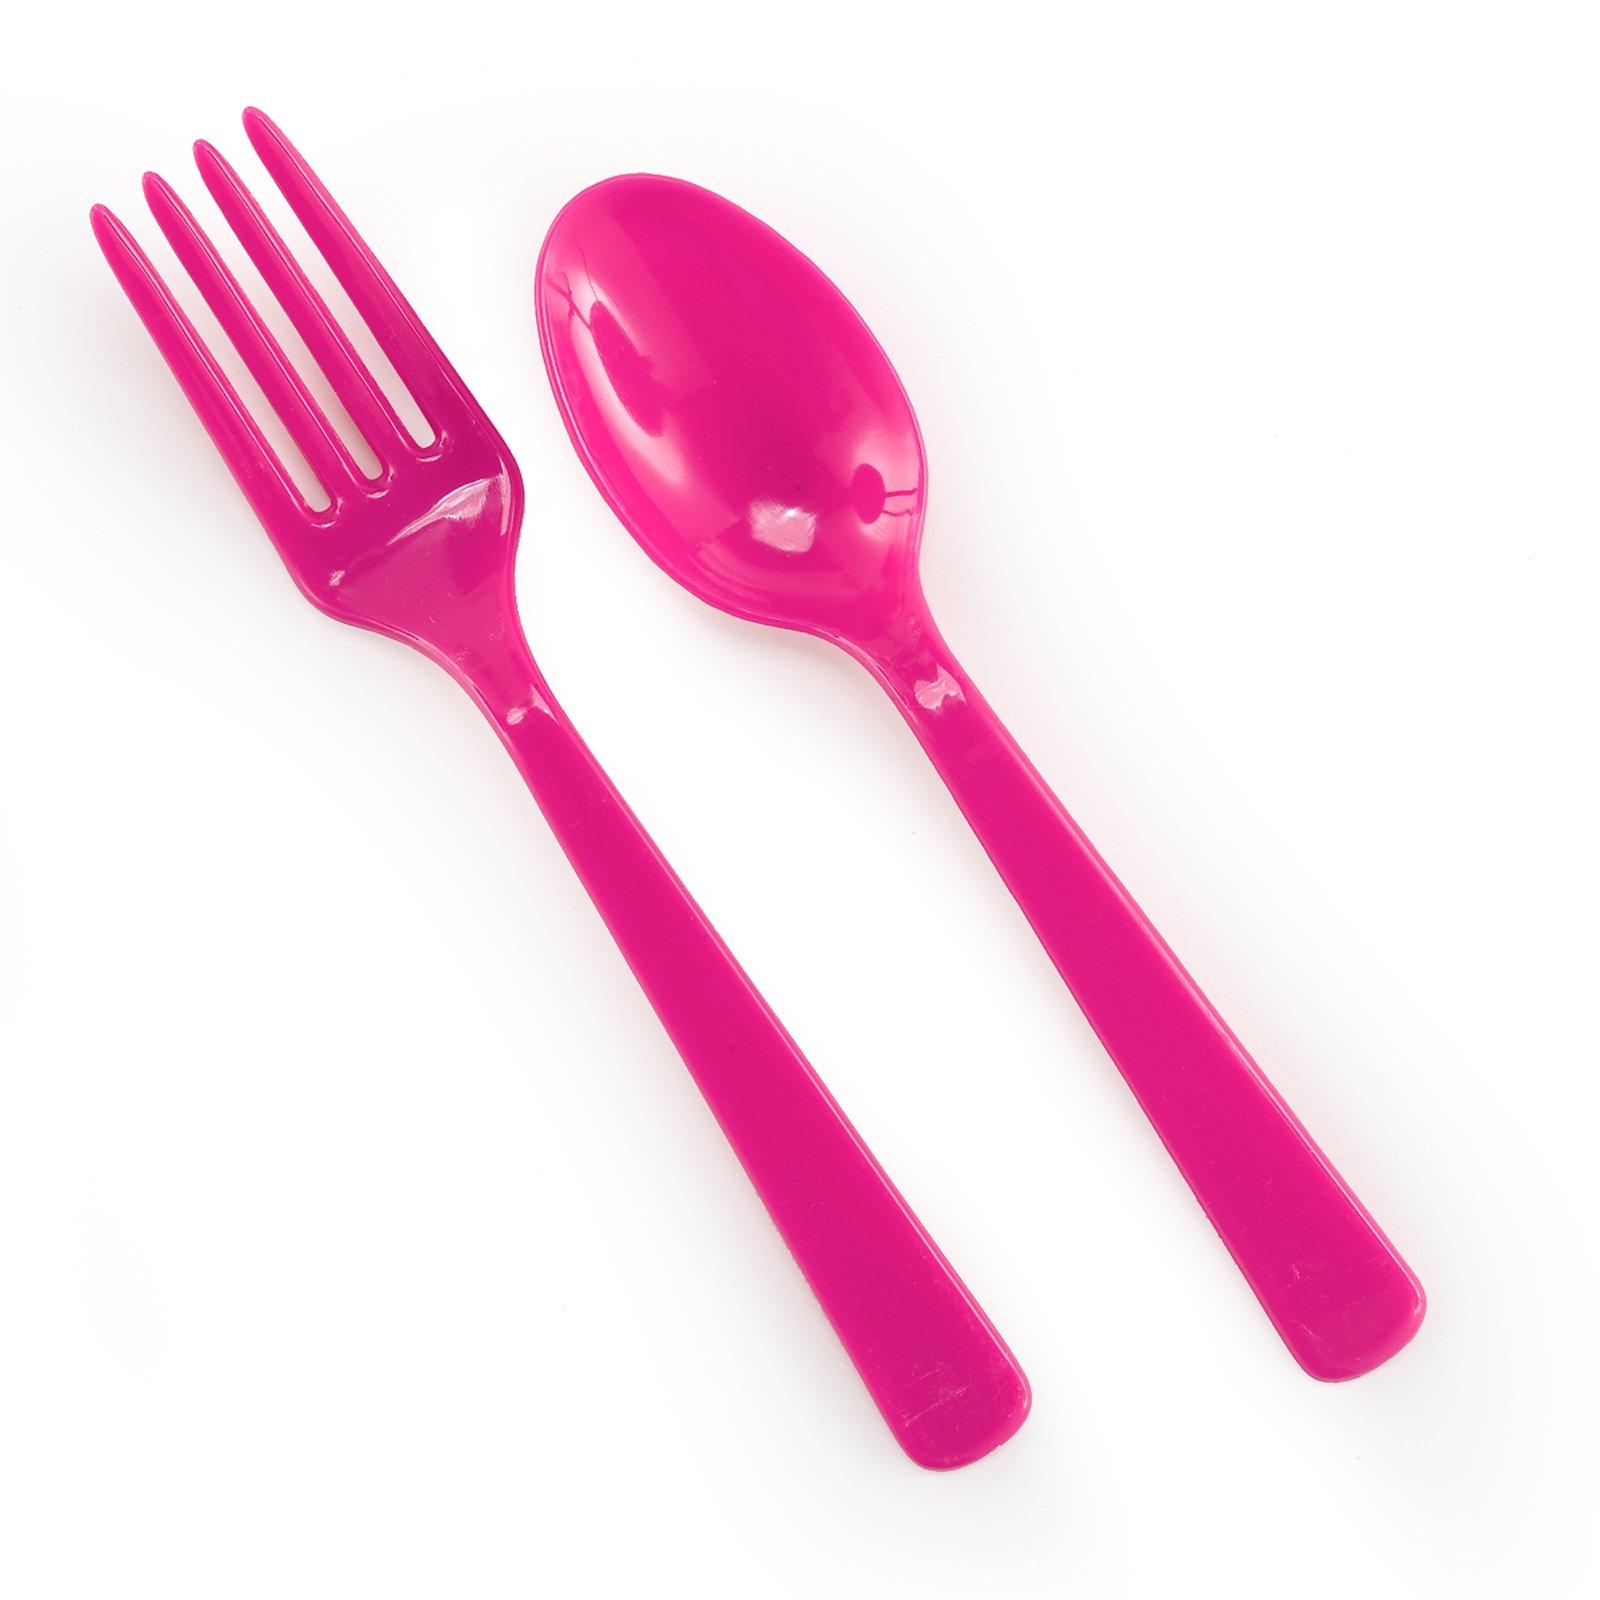 Pink spoons cliparts.